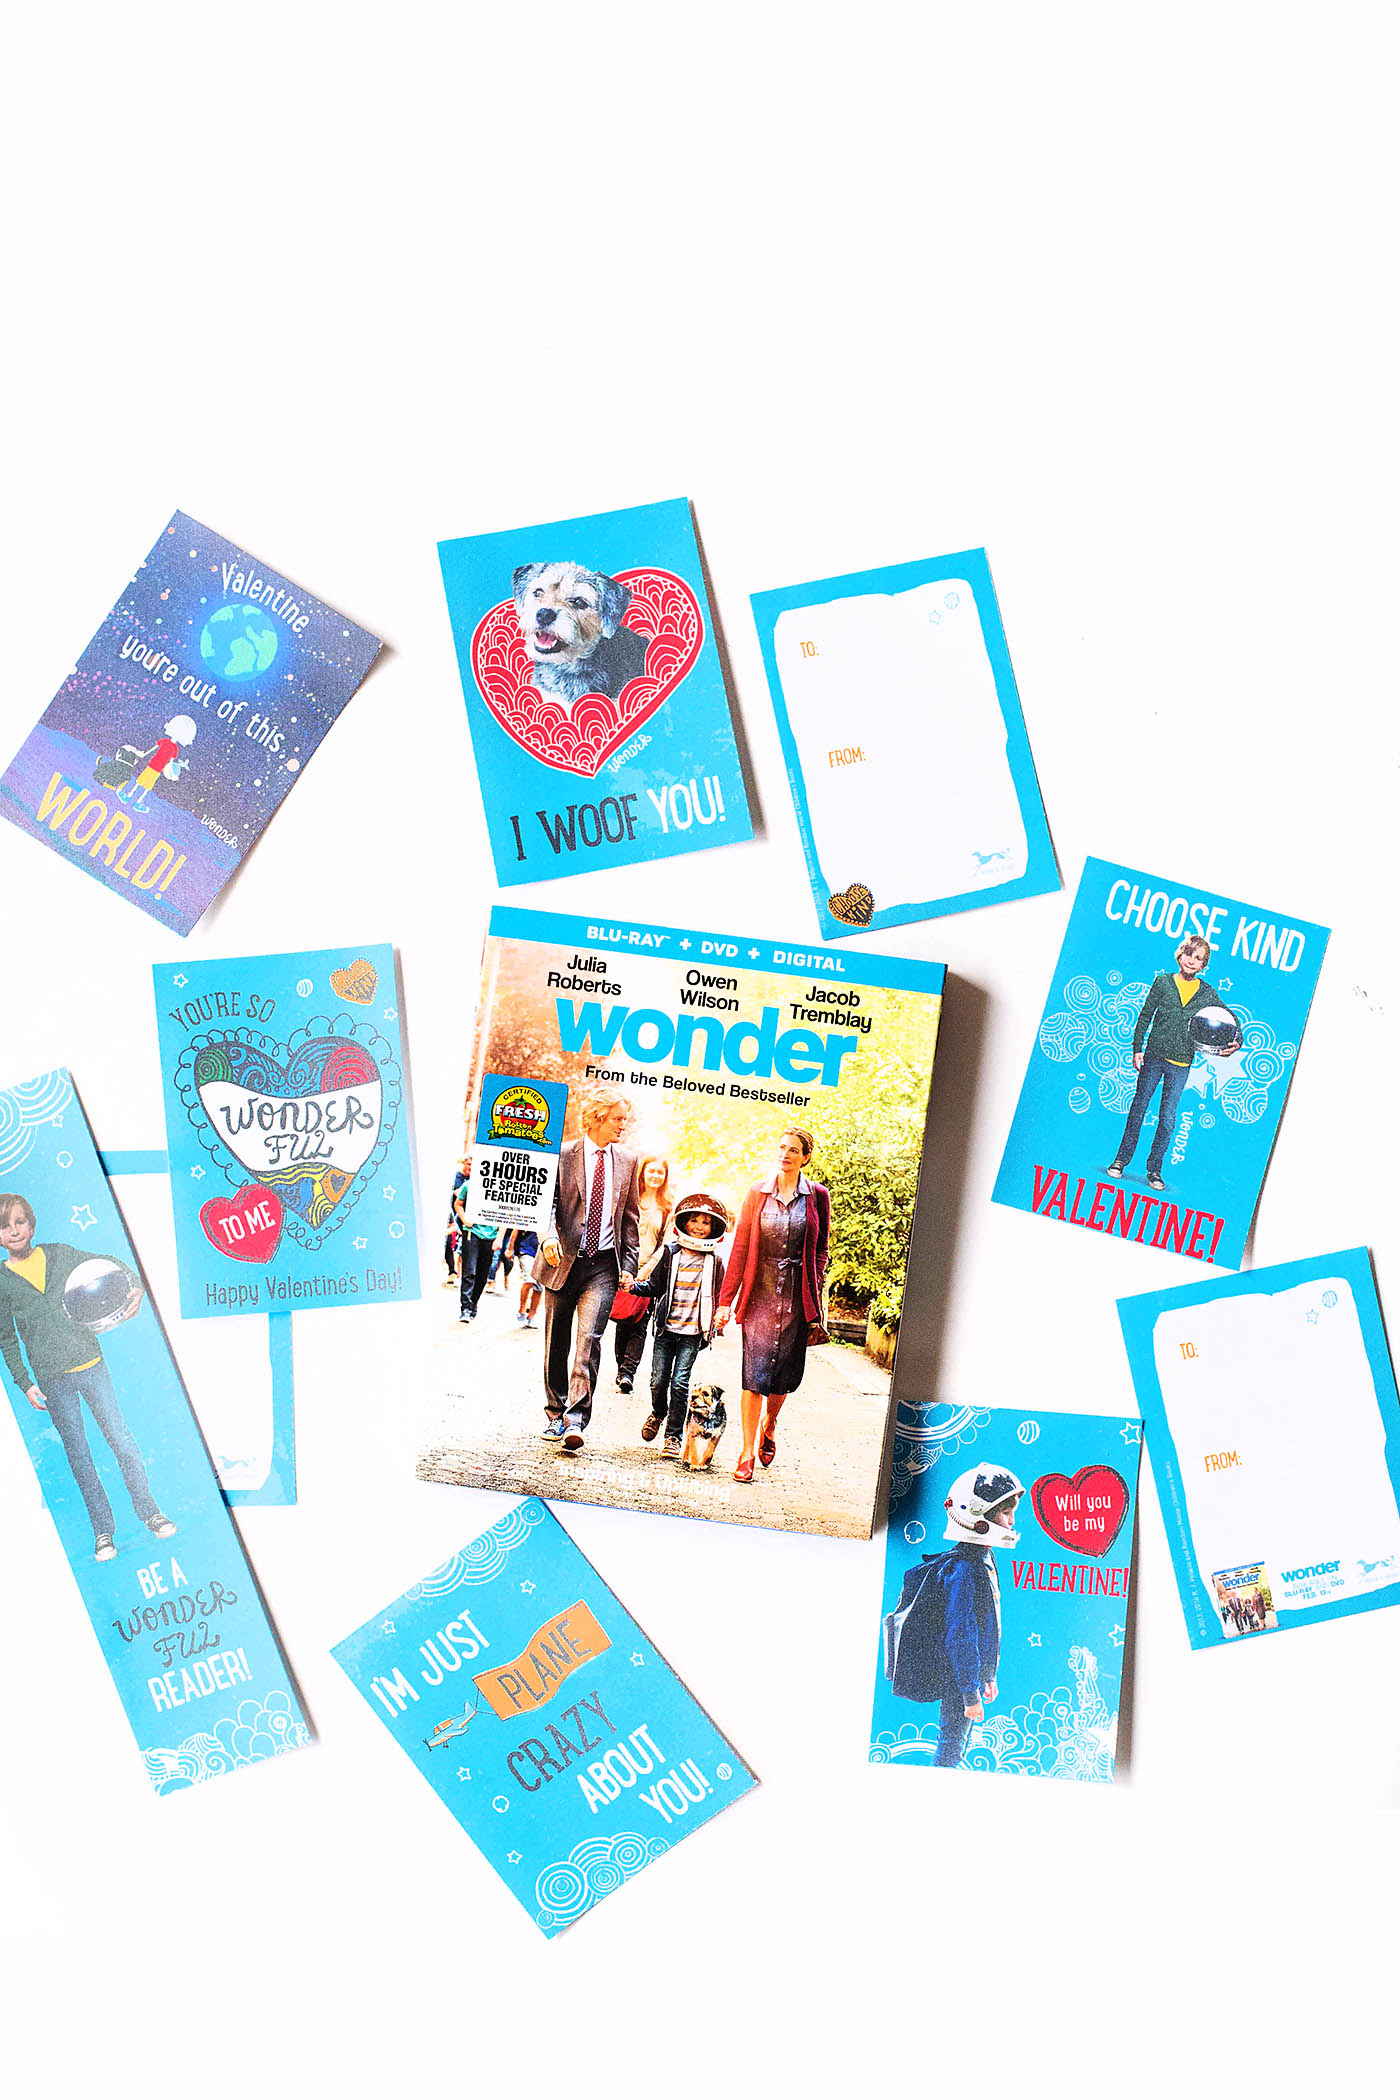 Wonder printable Valentines or activities - for teachers or at home!